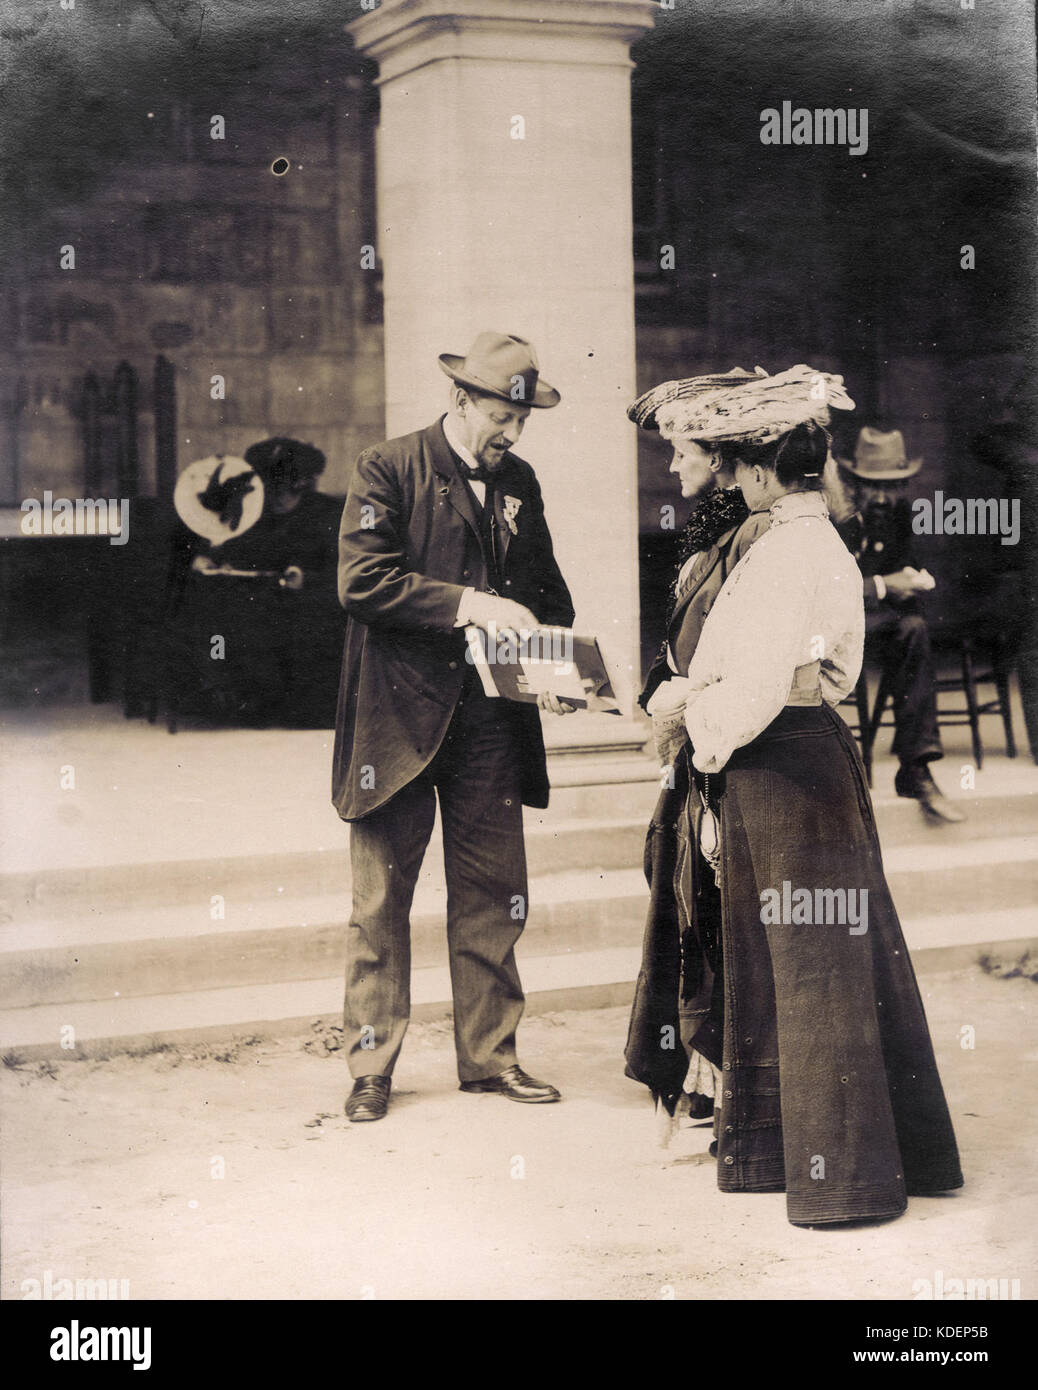 Professor of Physiography, Albrecht Penck of Vienna talking with two women visitors in front of Hall of Congresses at the 1904 World's Fair Stock Photo